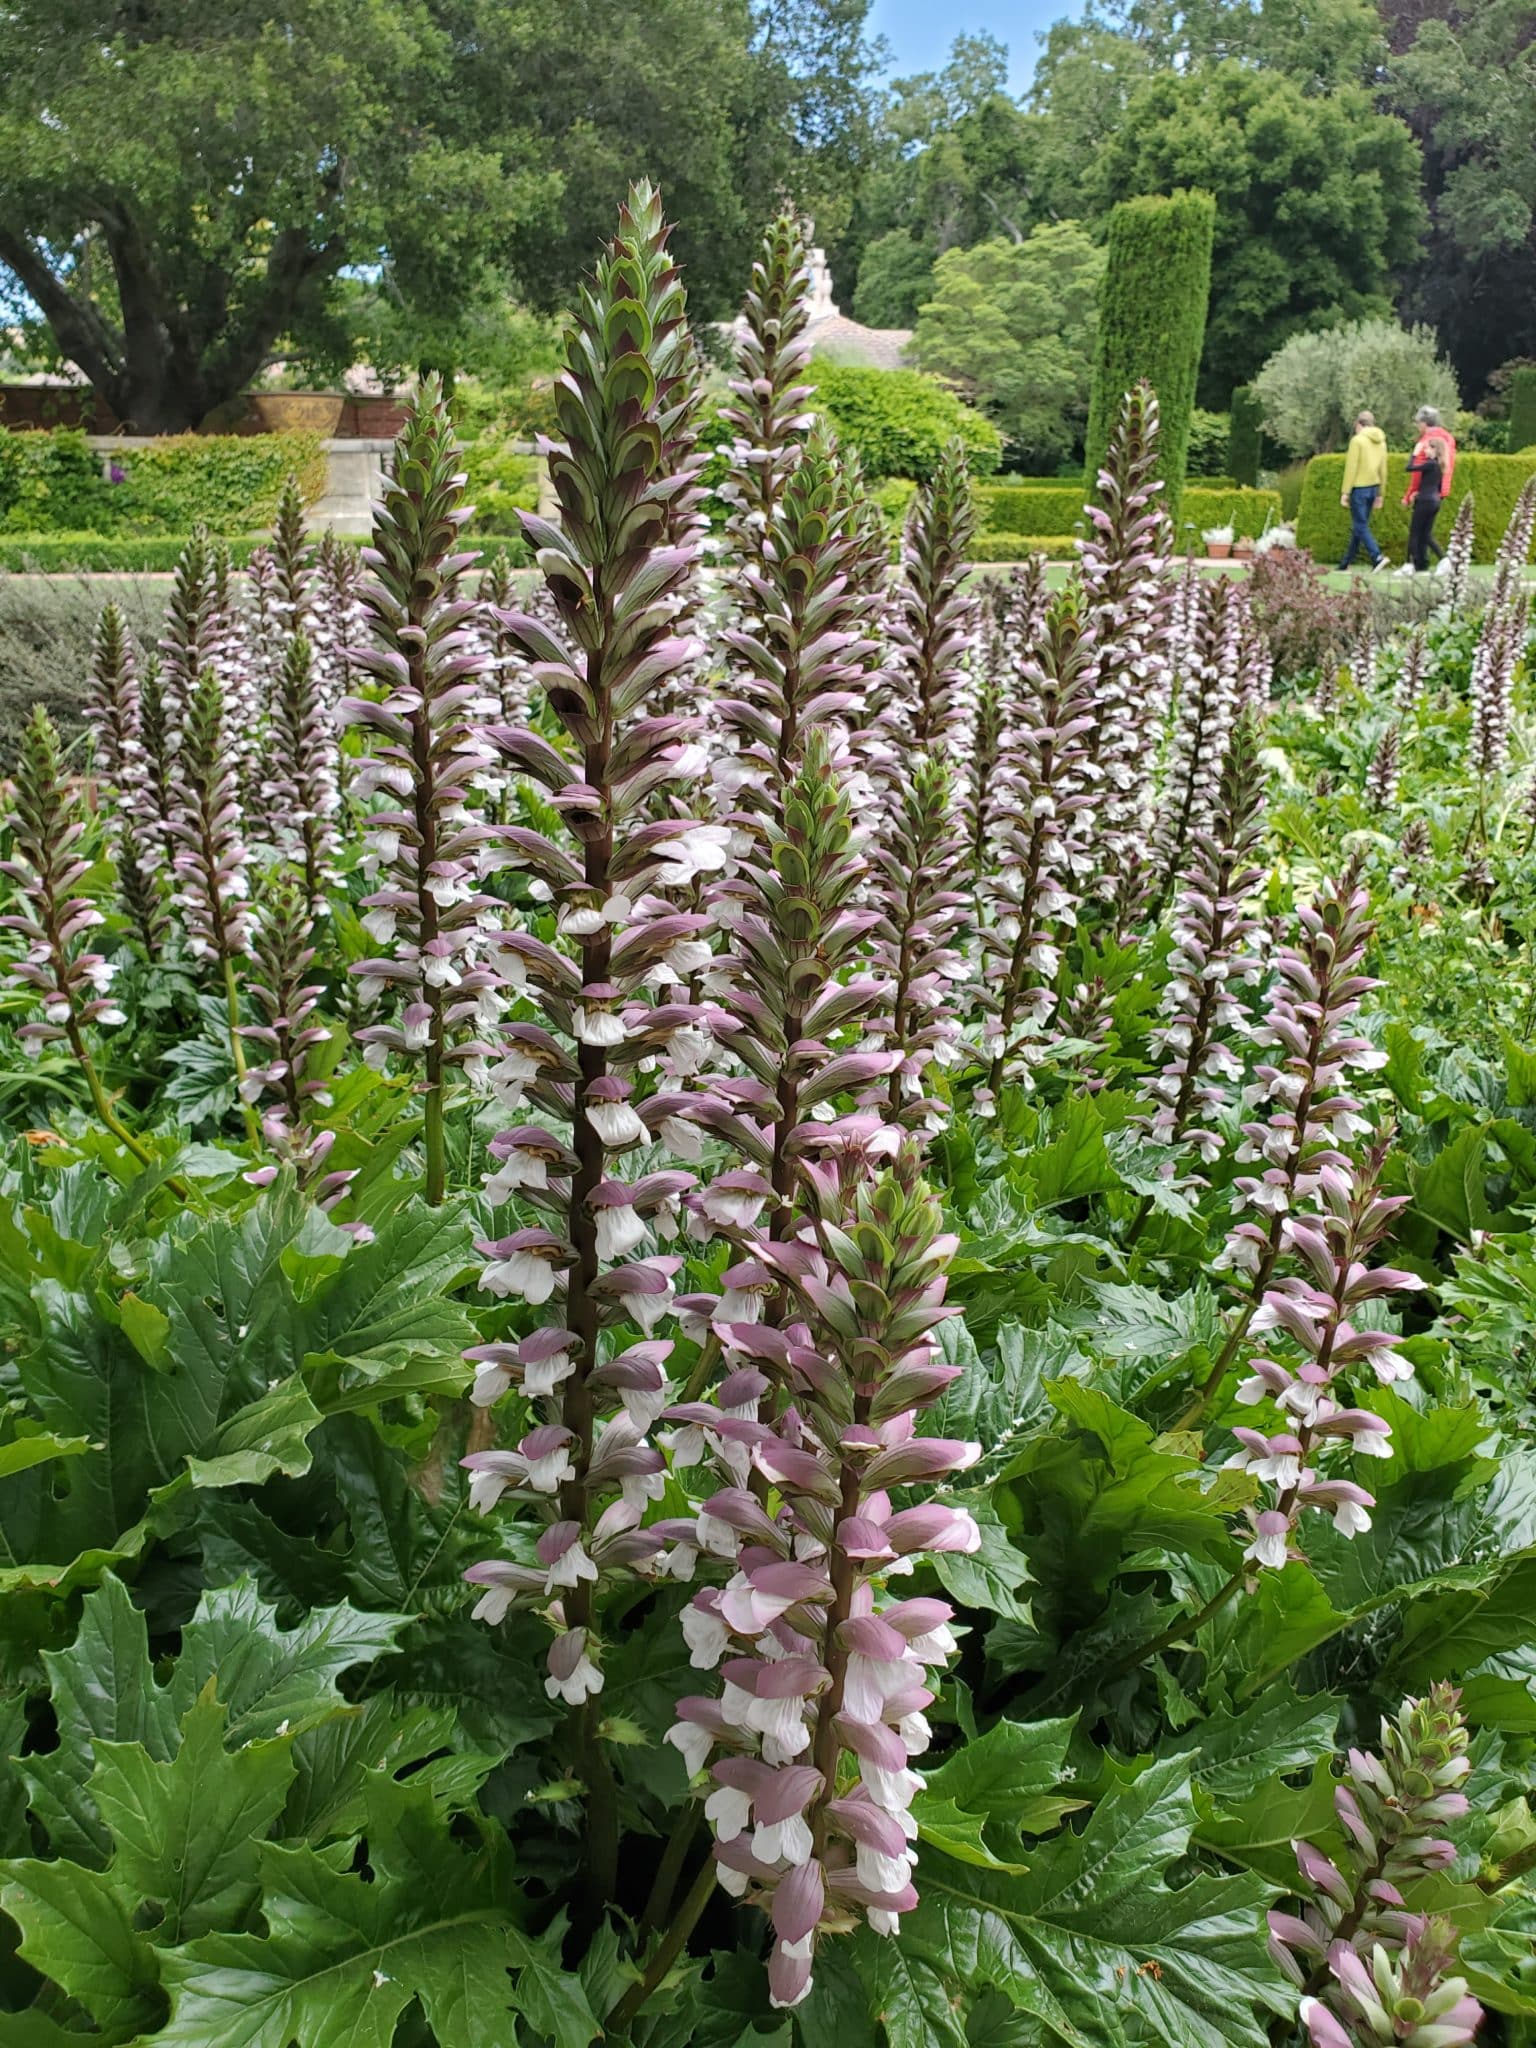 Tall acanthus with flowers of light purple with white petals and a dark green stalk.